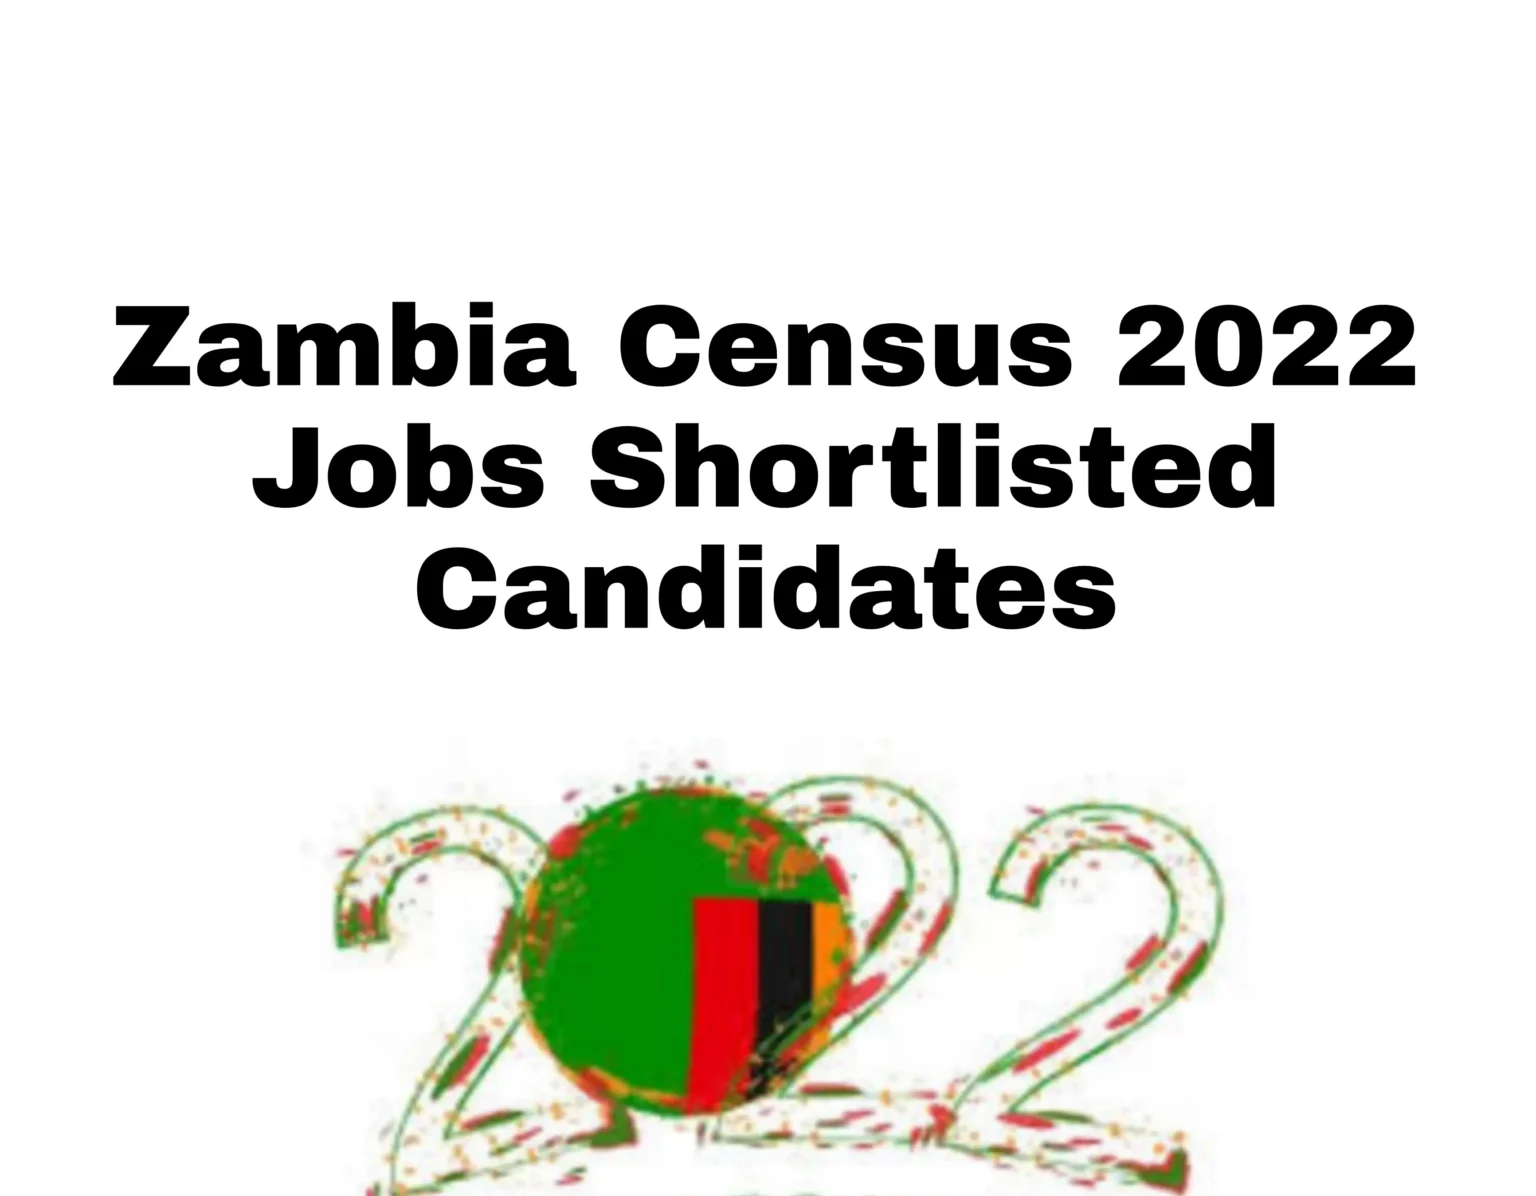 Zambia Census 2022 Jobs Shortlisted Candidates